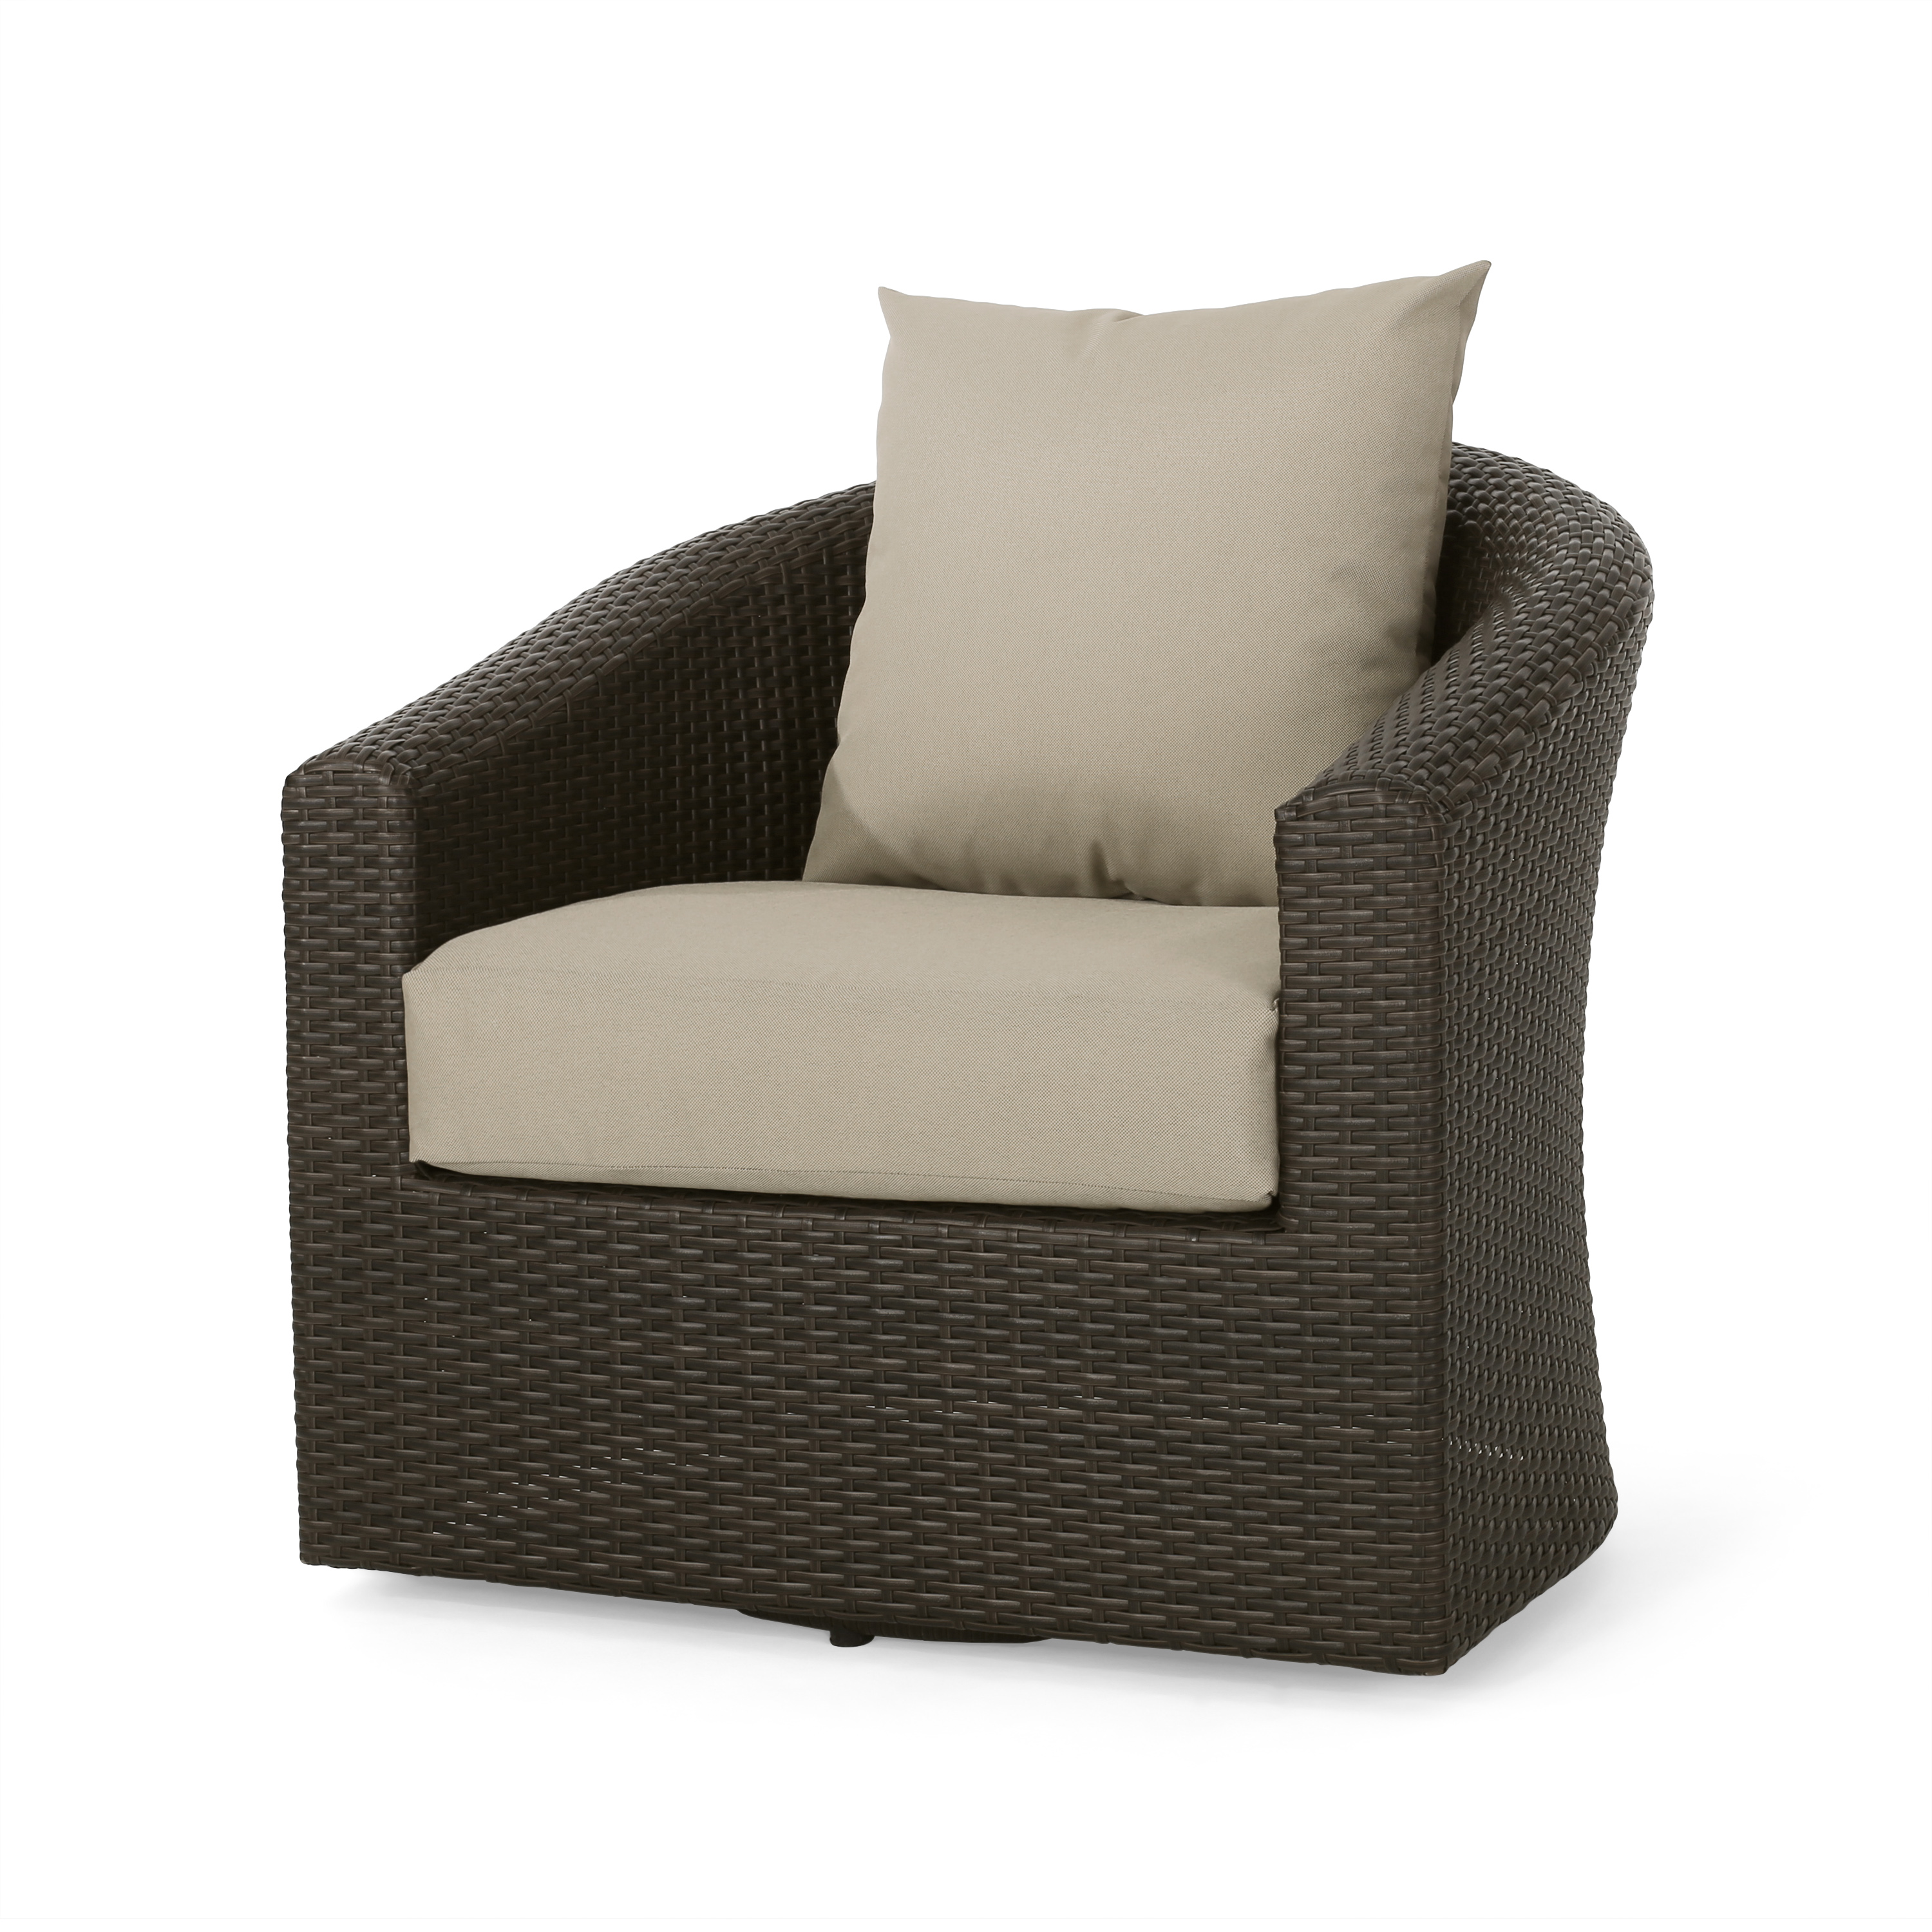 Dillard Outdoor Aluminum Framed Wicker Swivel Club Chair, Mixed Brown and Mixed Khaki - image 3 of 13